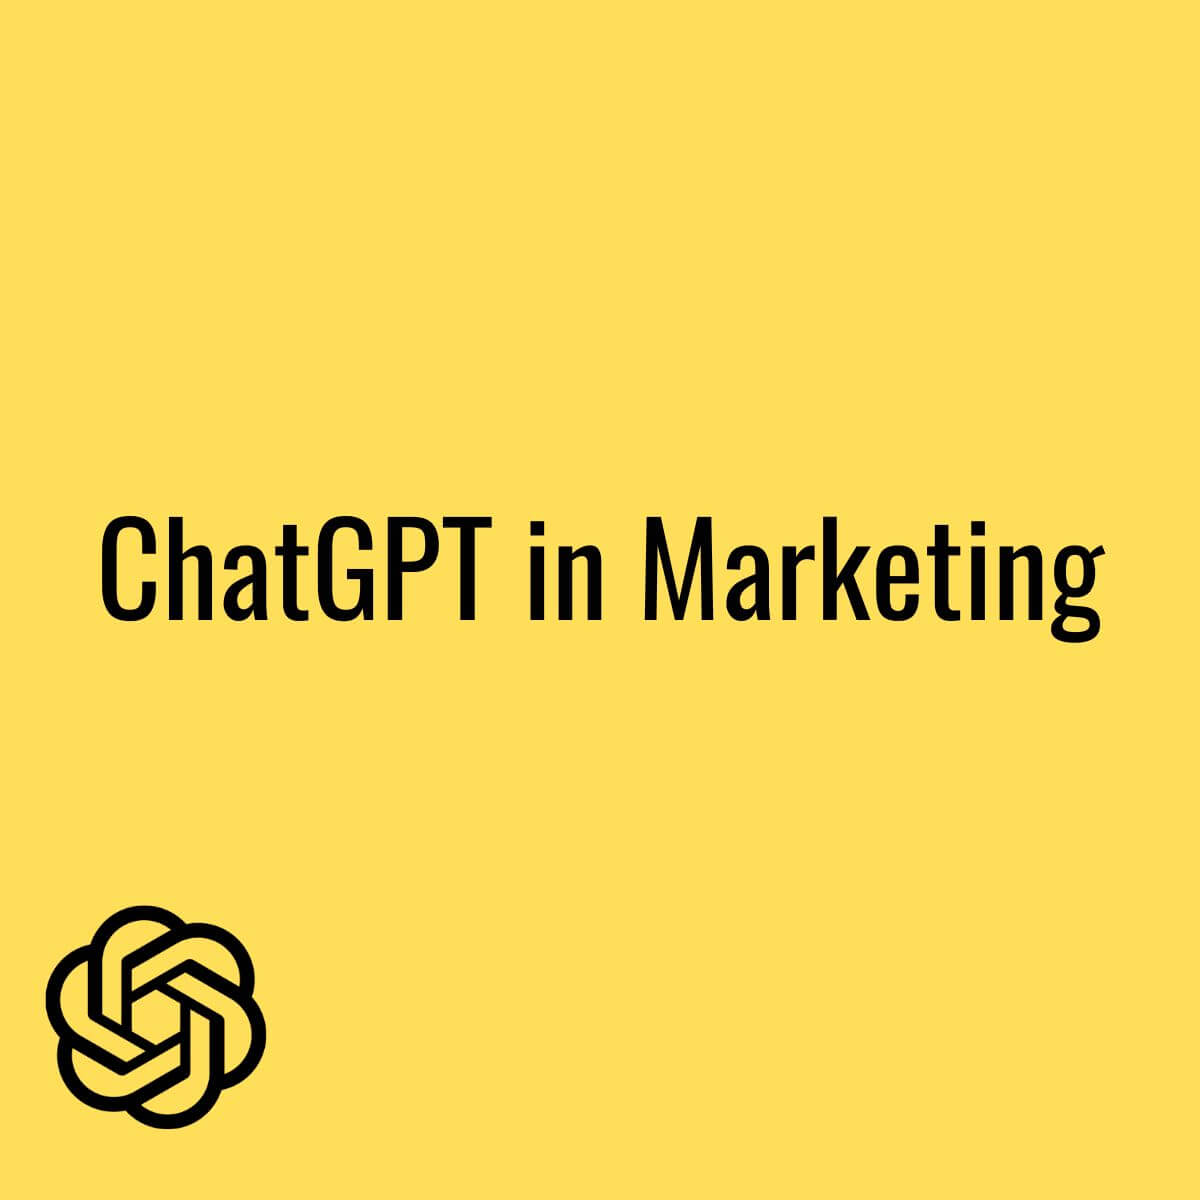 Using chatGPT as a digital marketer